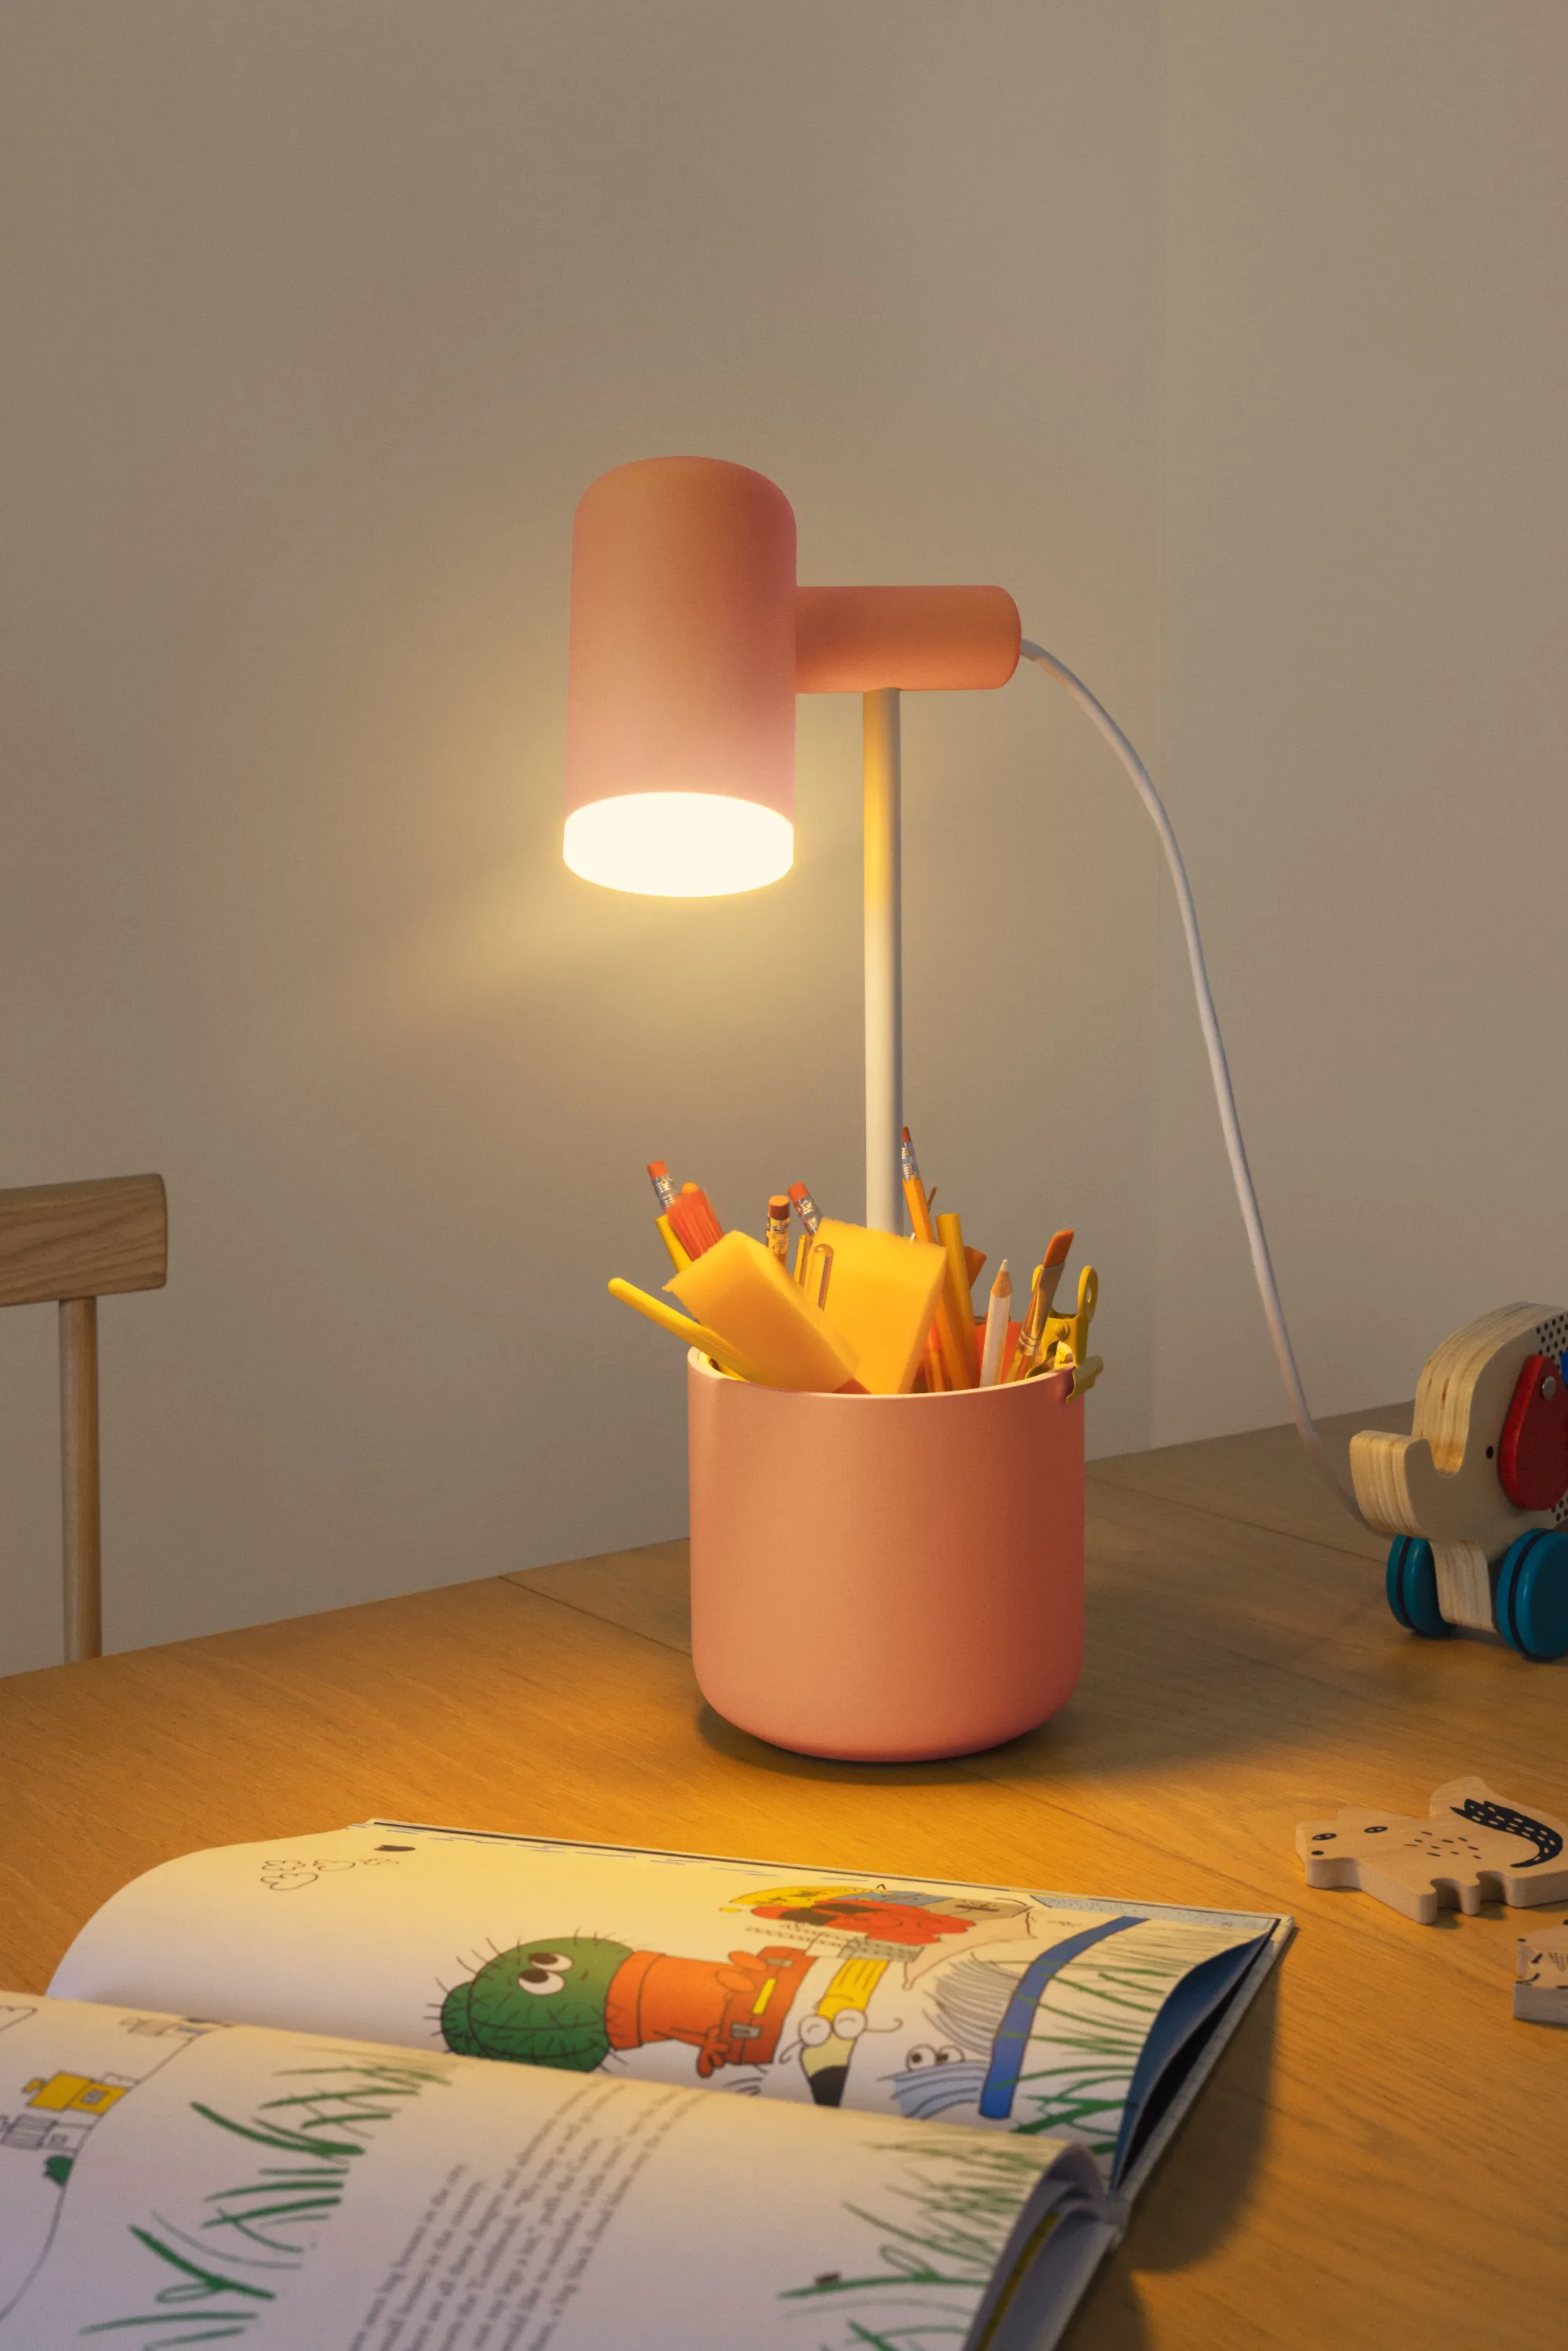 A Gantri Fieldtrip Table Light in blossom is filled with various writing materials and illuminates an open book,